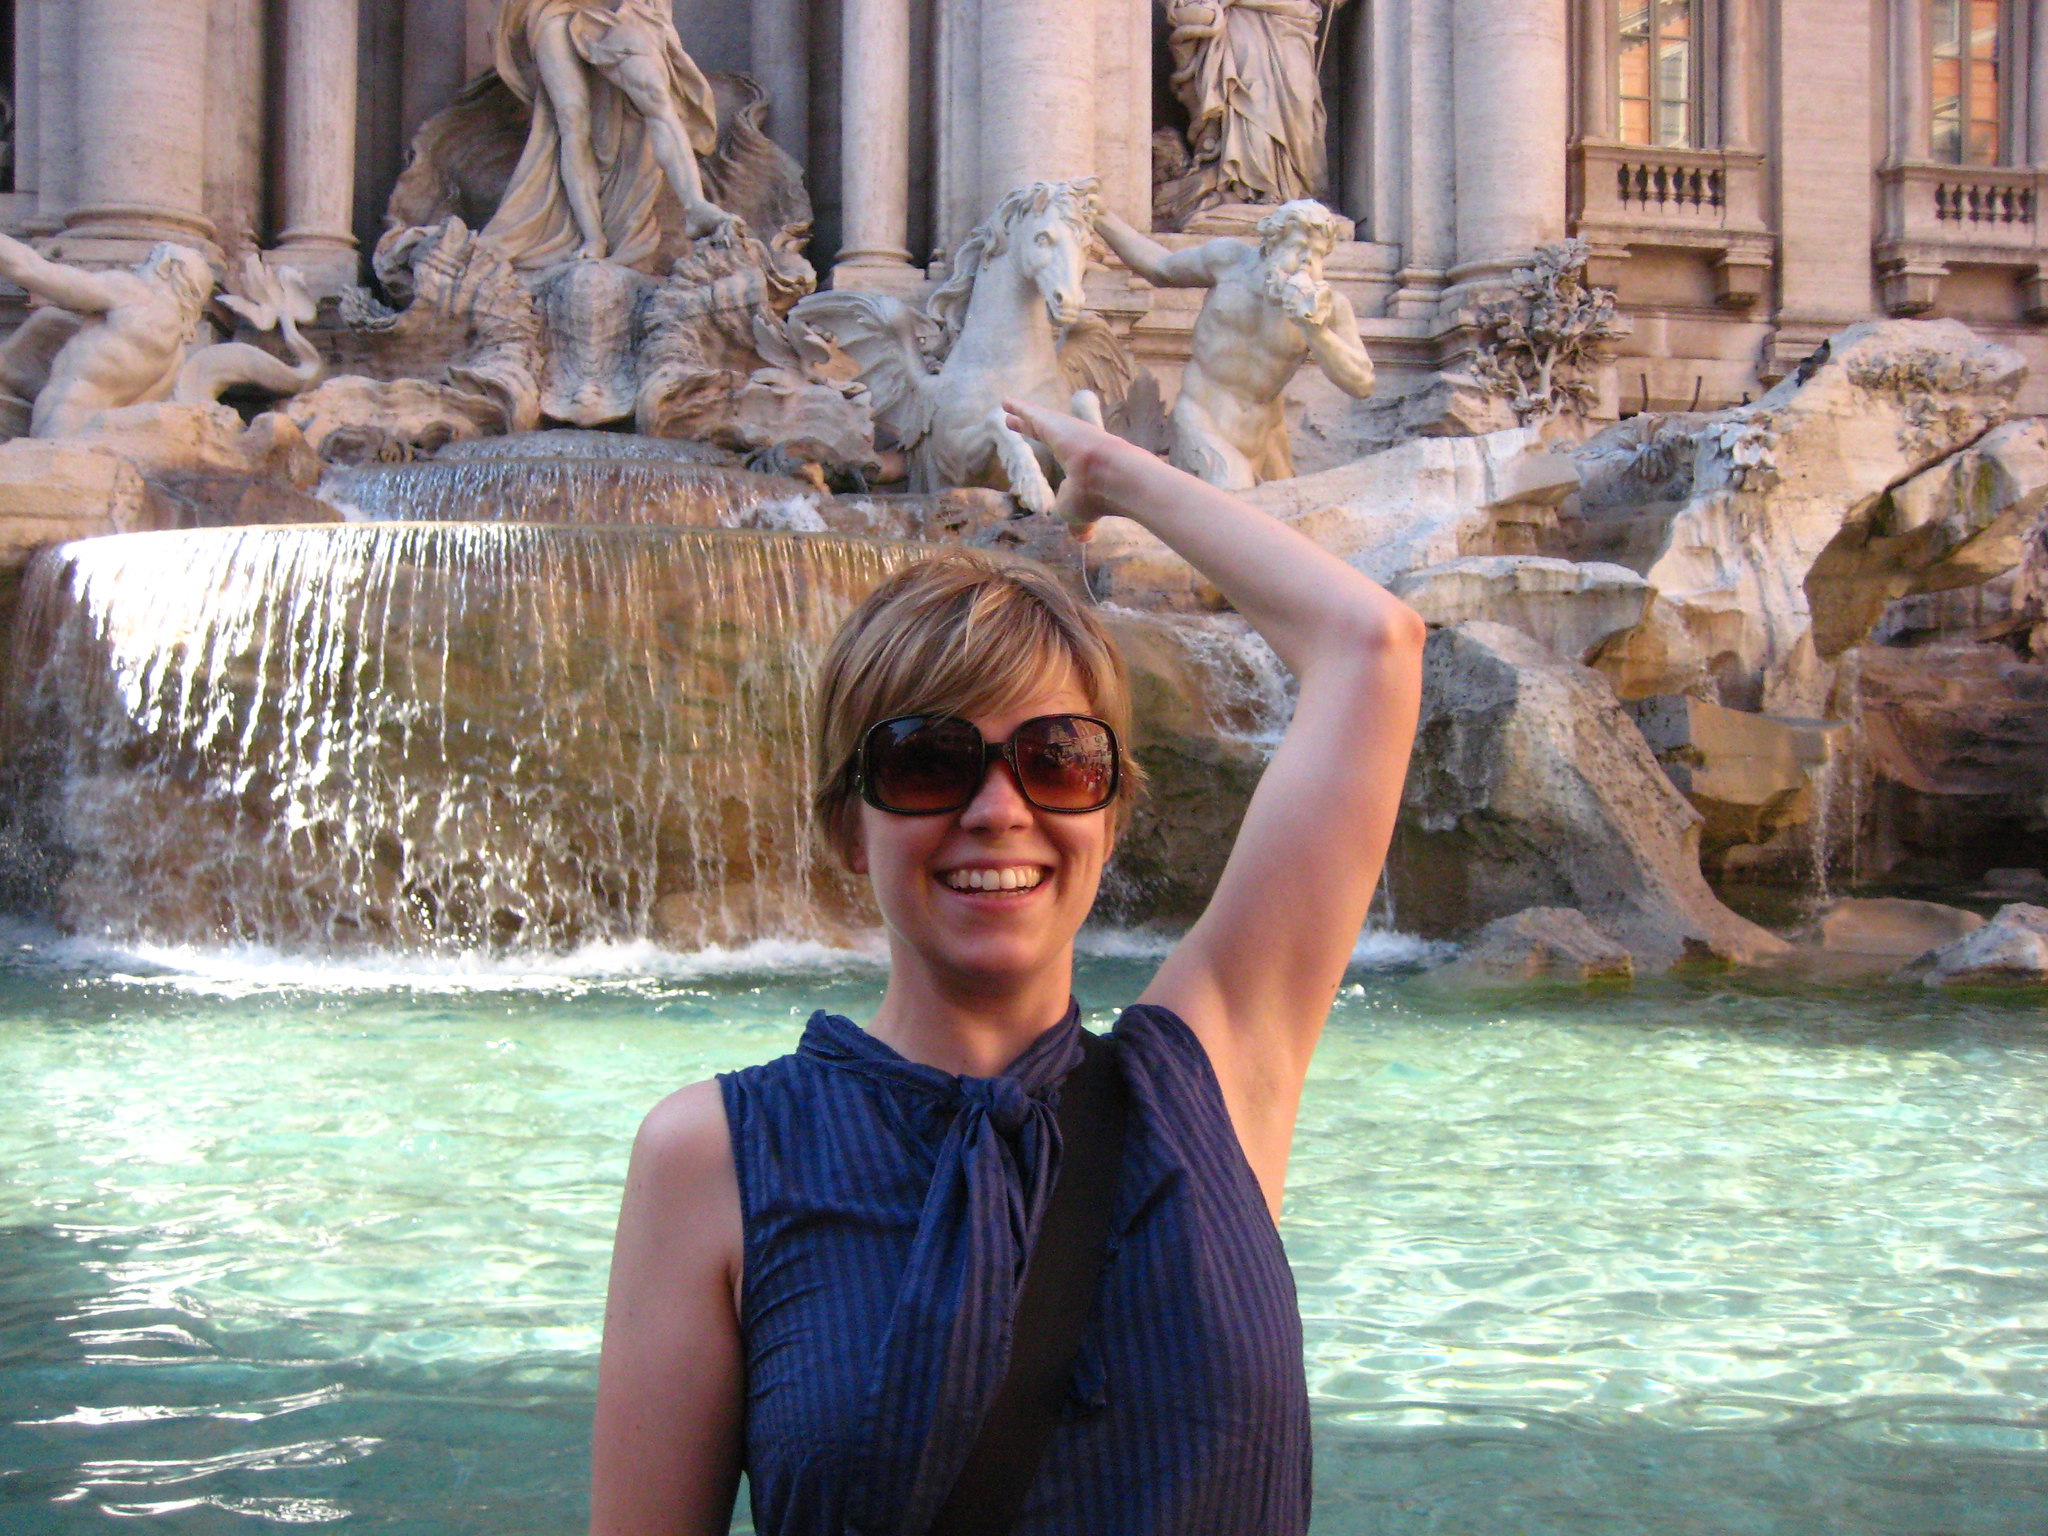 <p>Tourists are also eager to throw a coin in the fountain. It's estimated that 3,000 euros are tossed into the Trevi Fountain every day.</p>